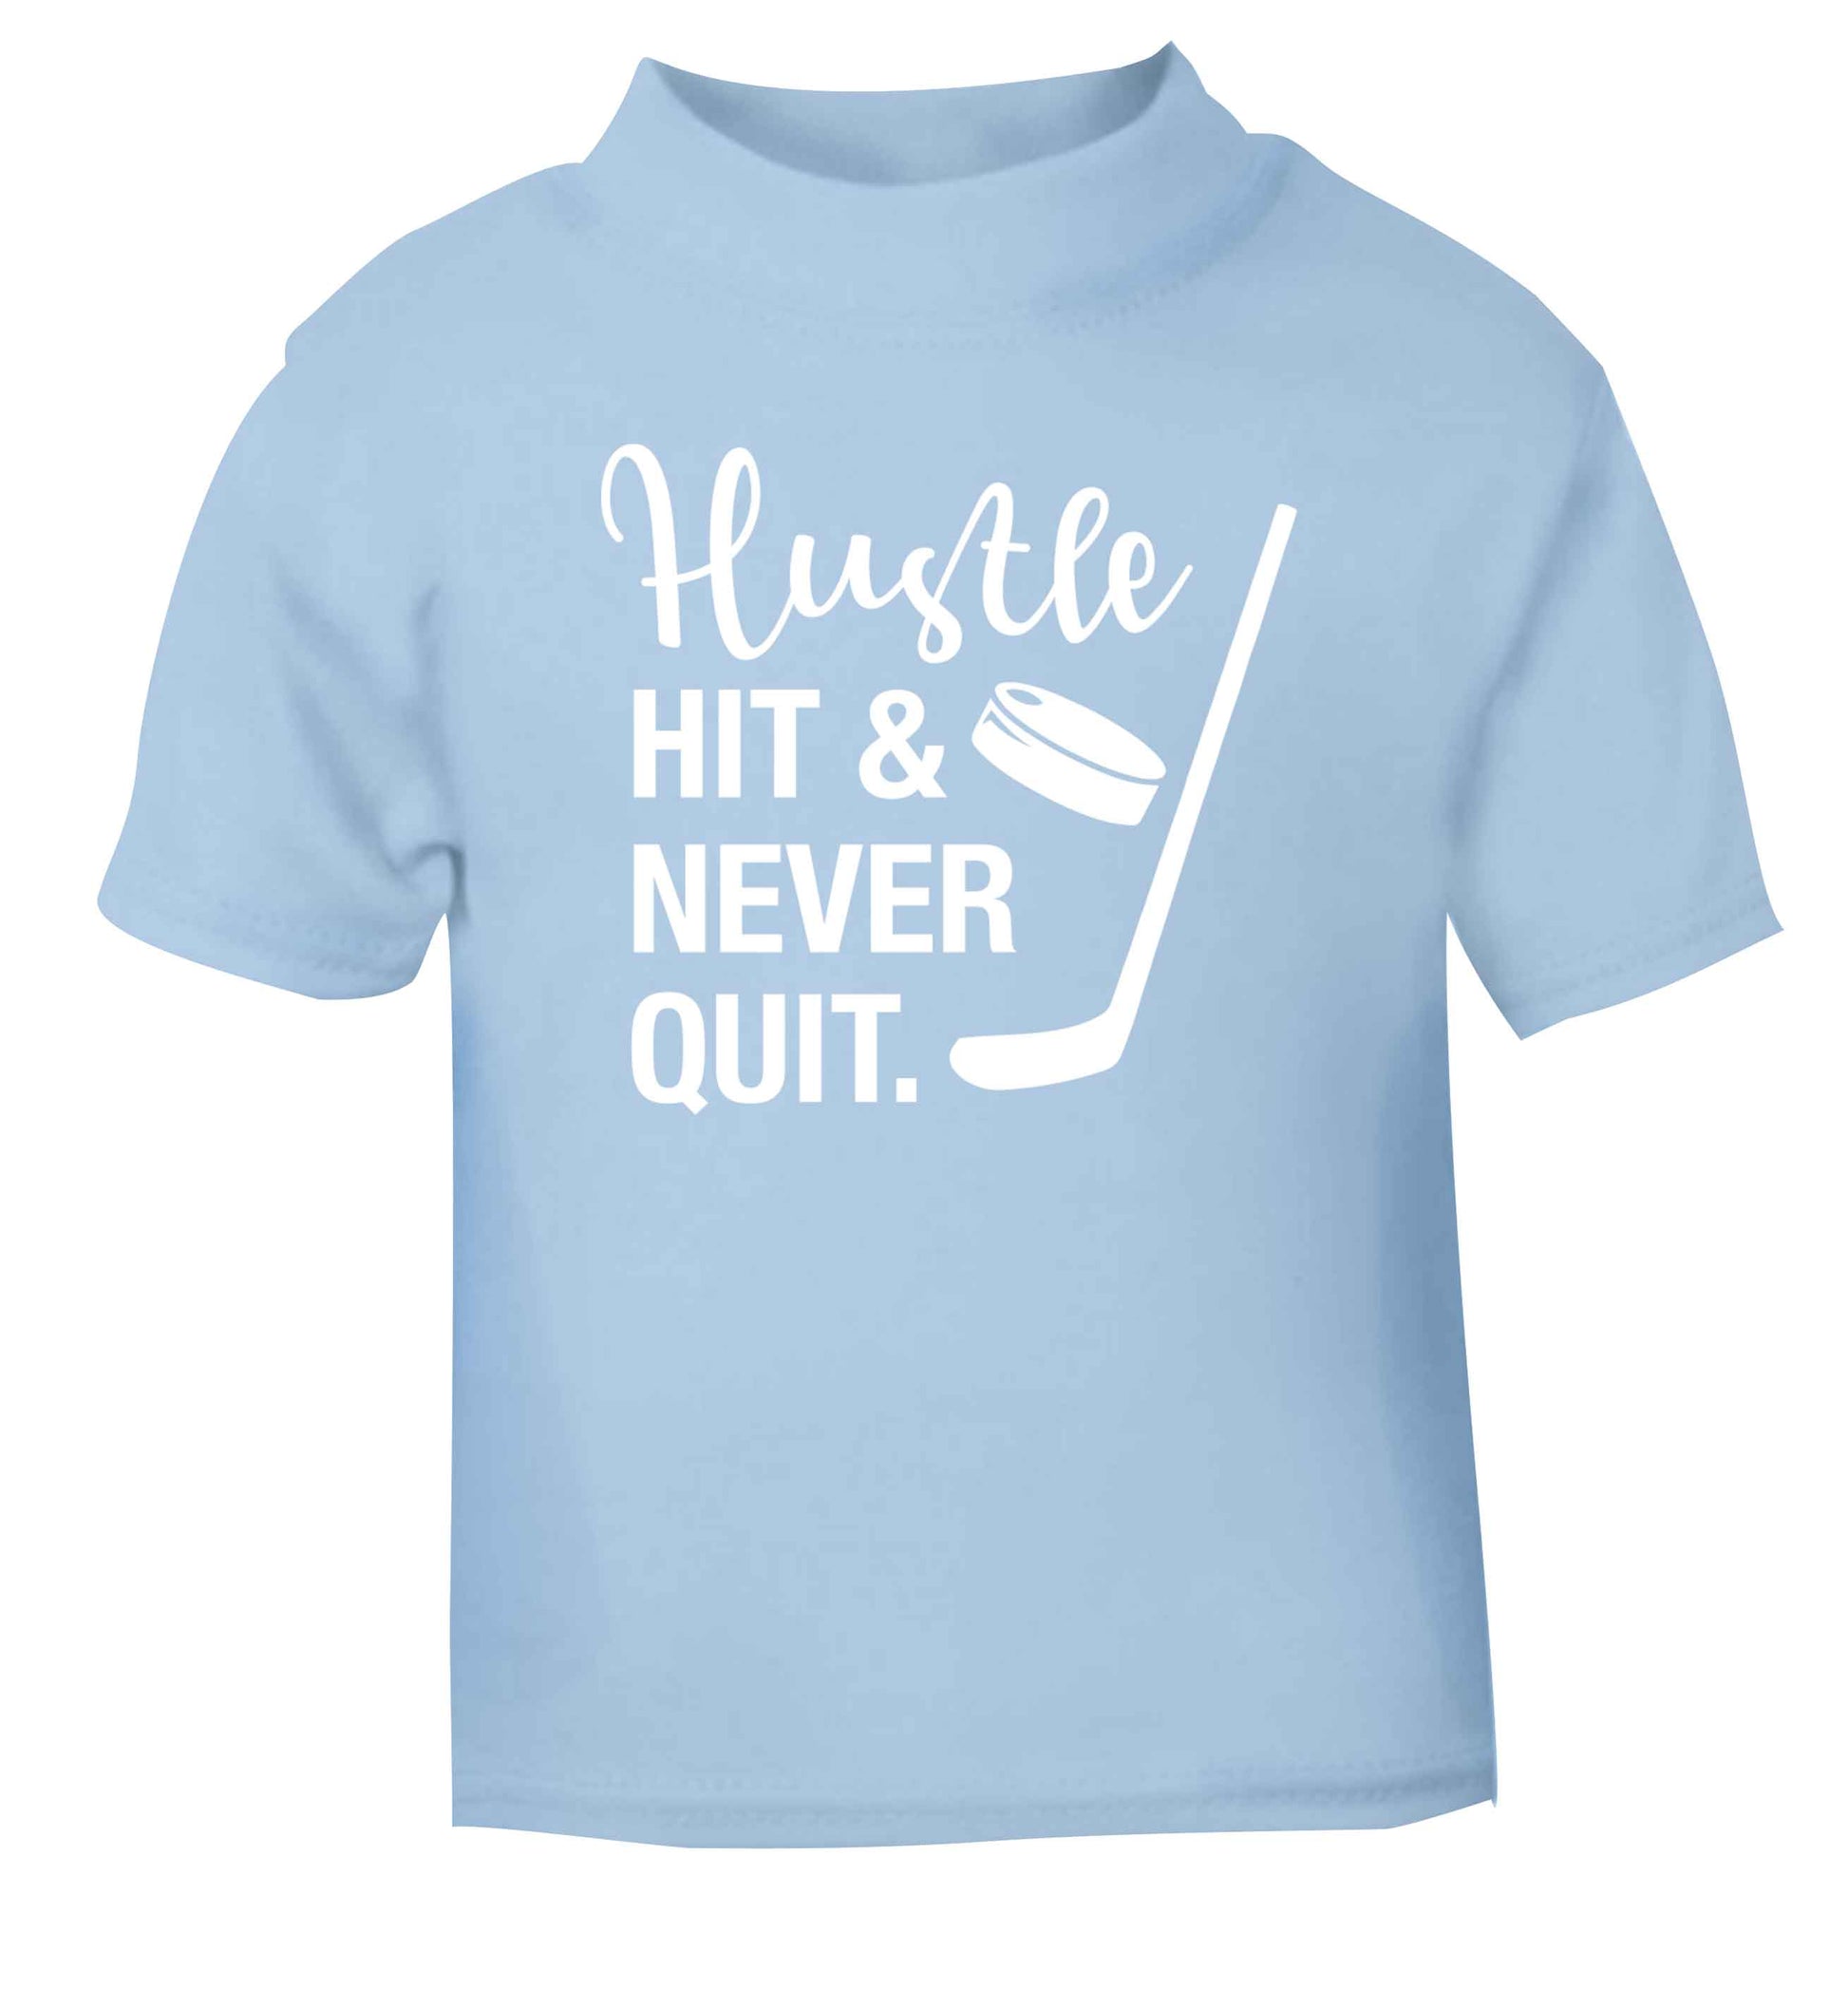 Hustle hit and never quit light blue Baby Toddler Tshirt 2 Years